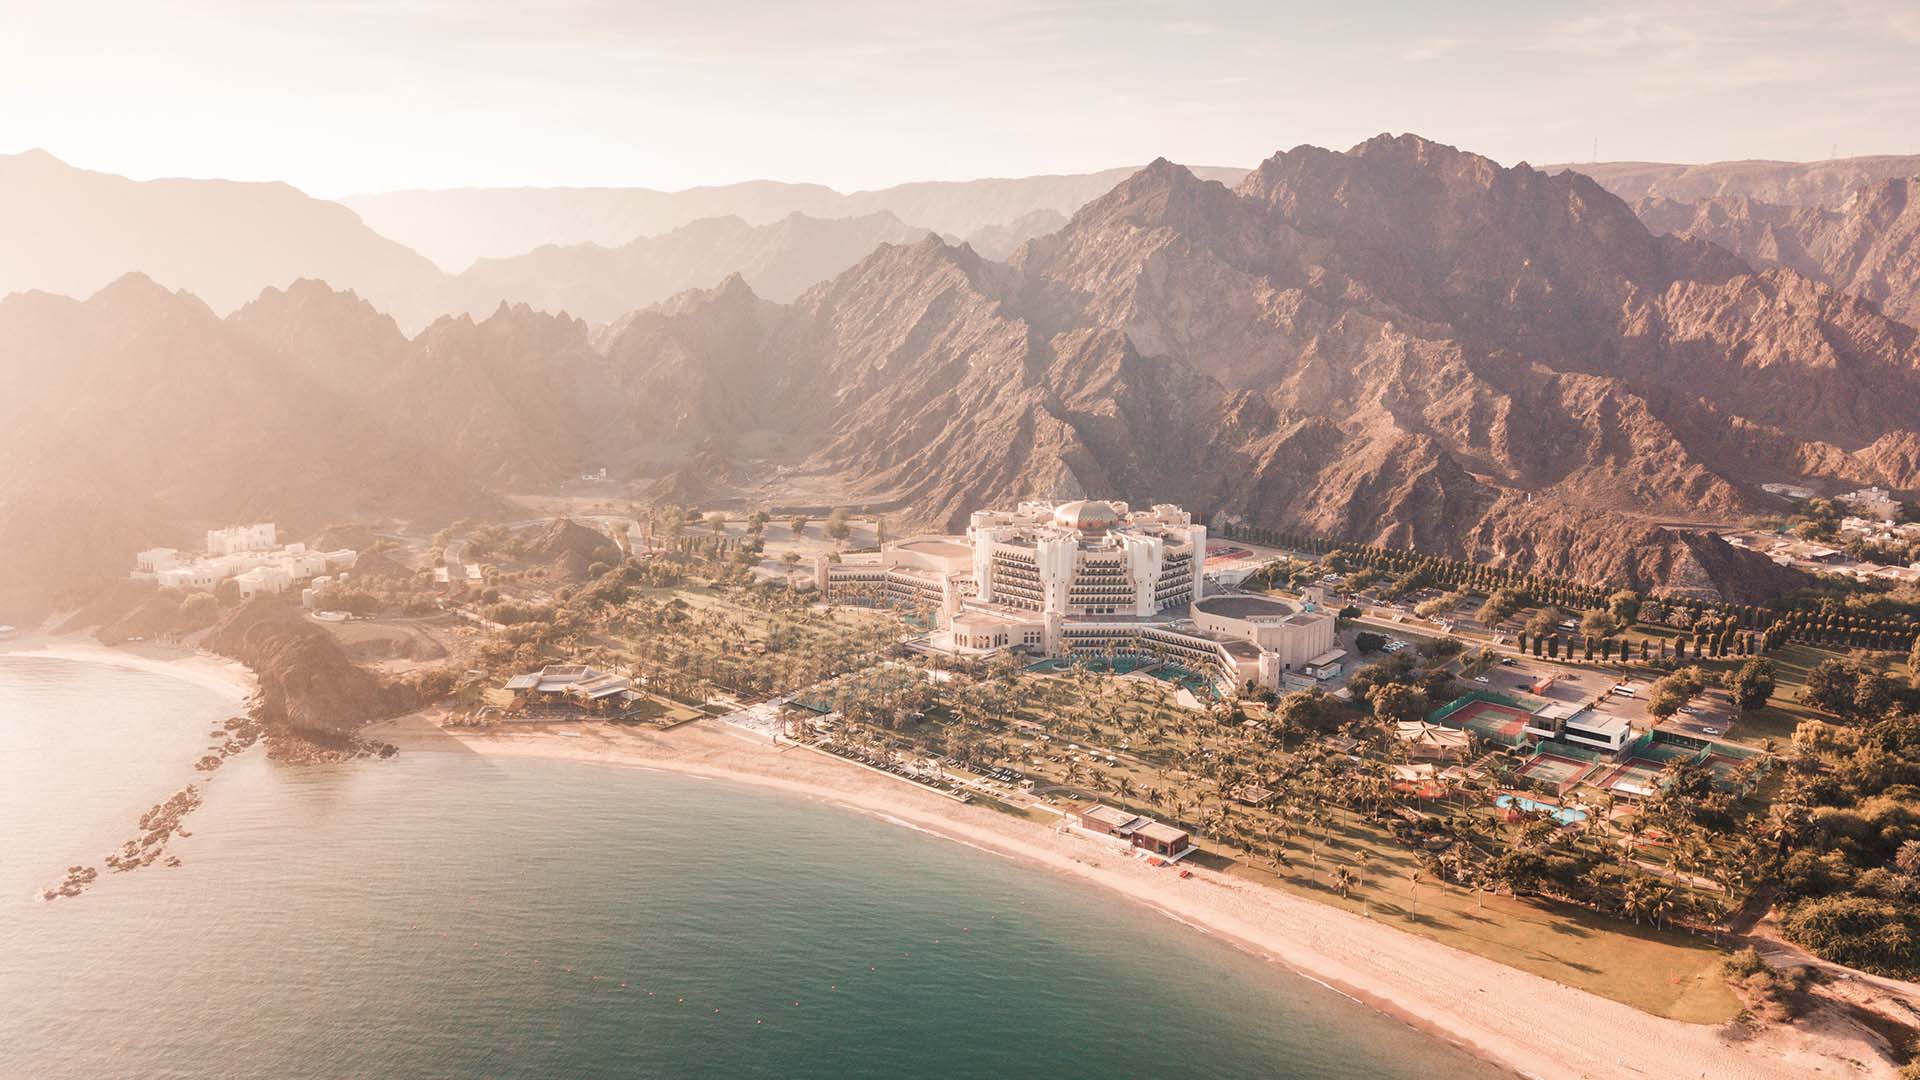 7 Reasons Why Oman Is a Beach-Lover’s Paradise